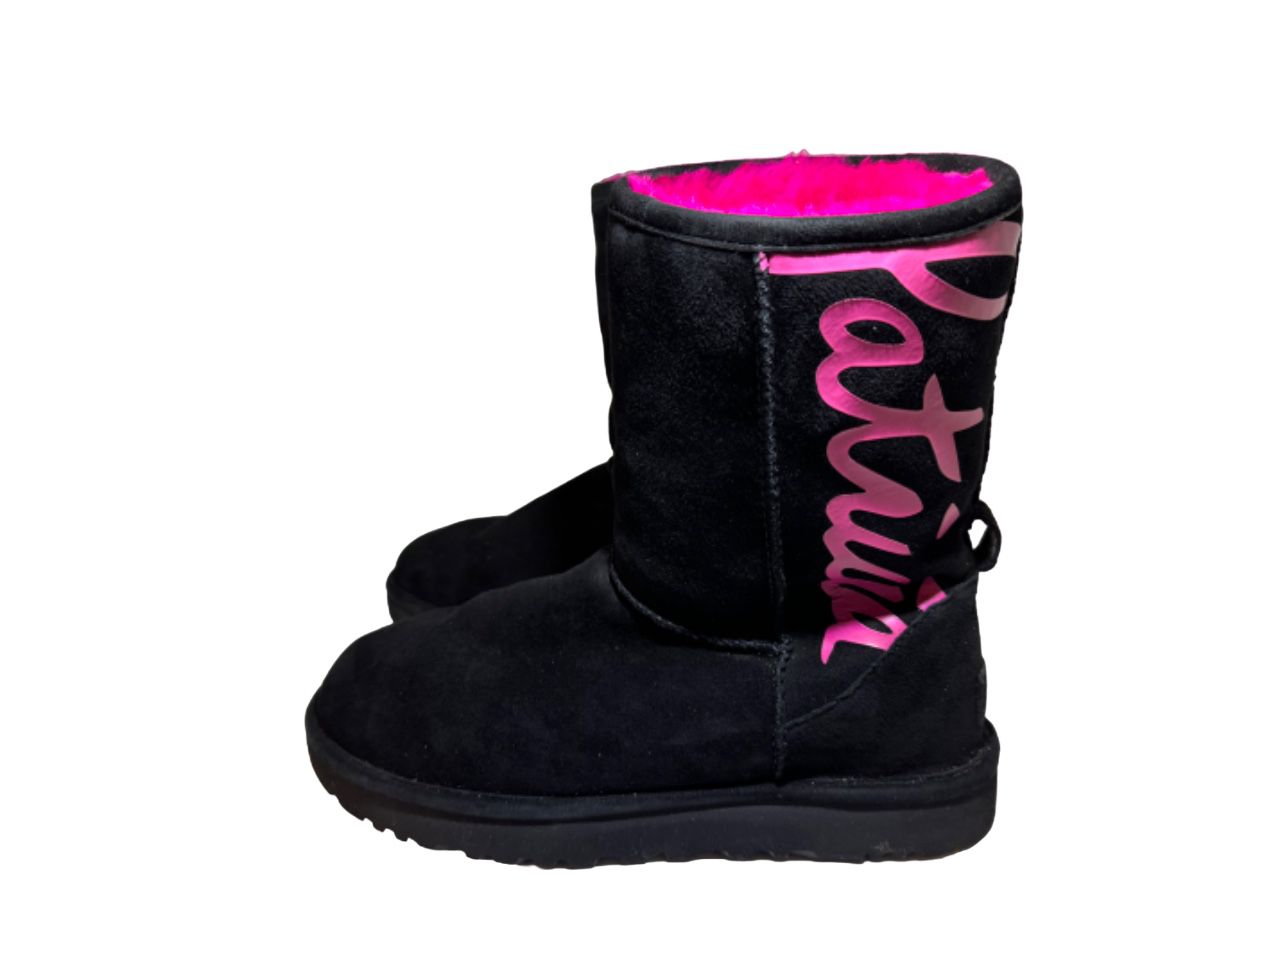 Ugg X Patricia Field Limited Edition Women Boot Black Suede With Pink